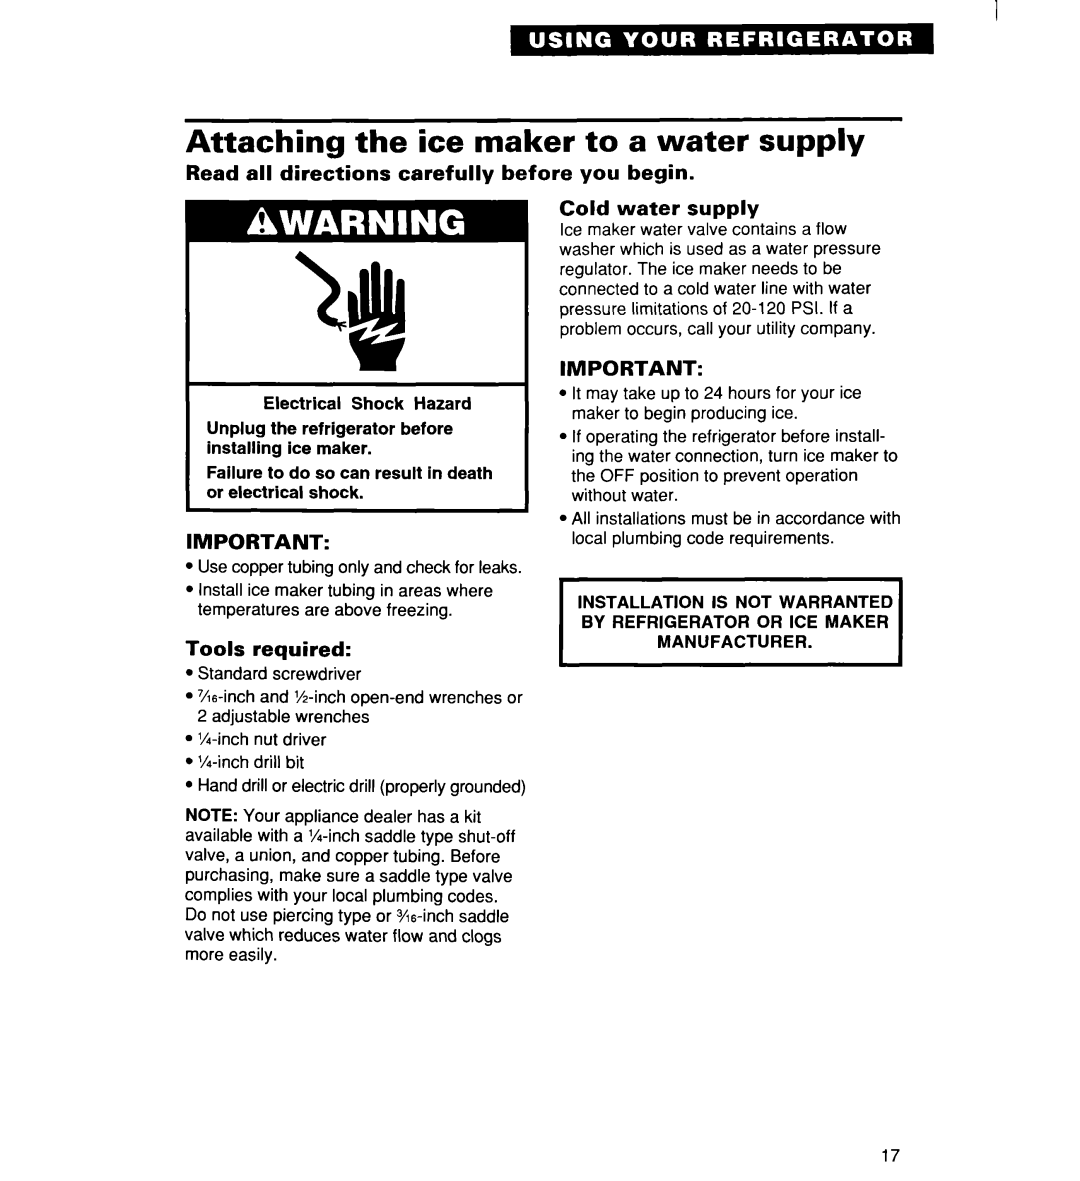 Whirlpool 2194182 warranty Attaching the ice maker to a water supply, Read all directions carefully before you begin 